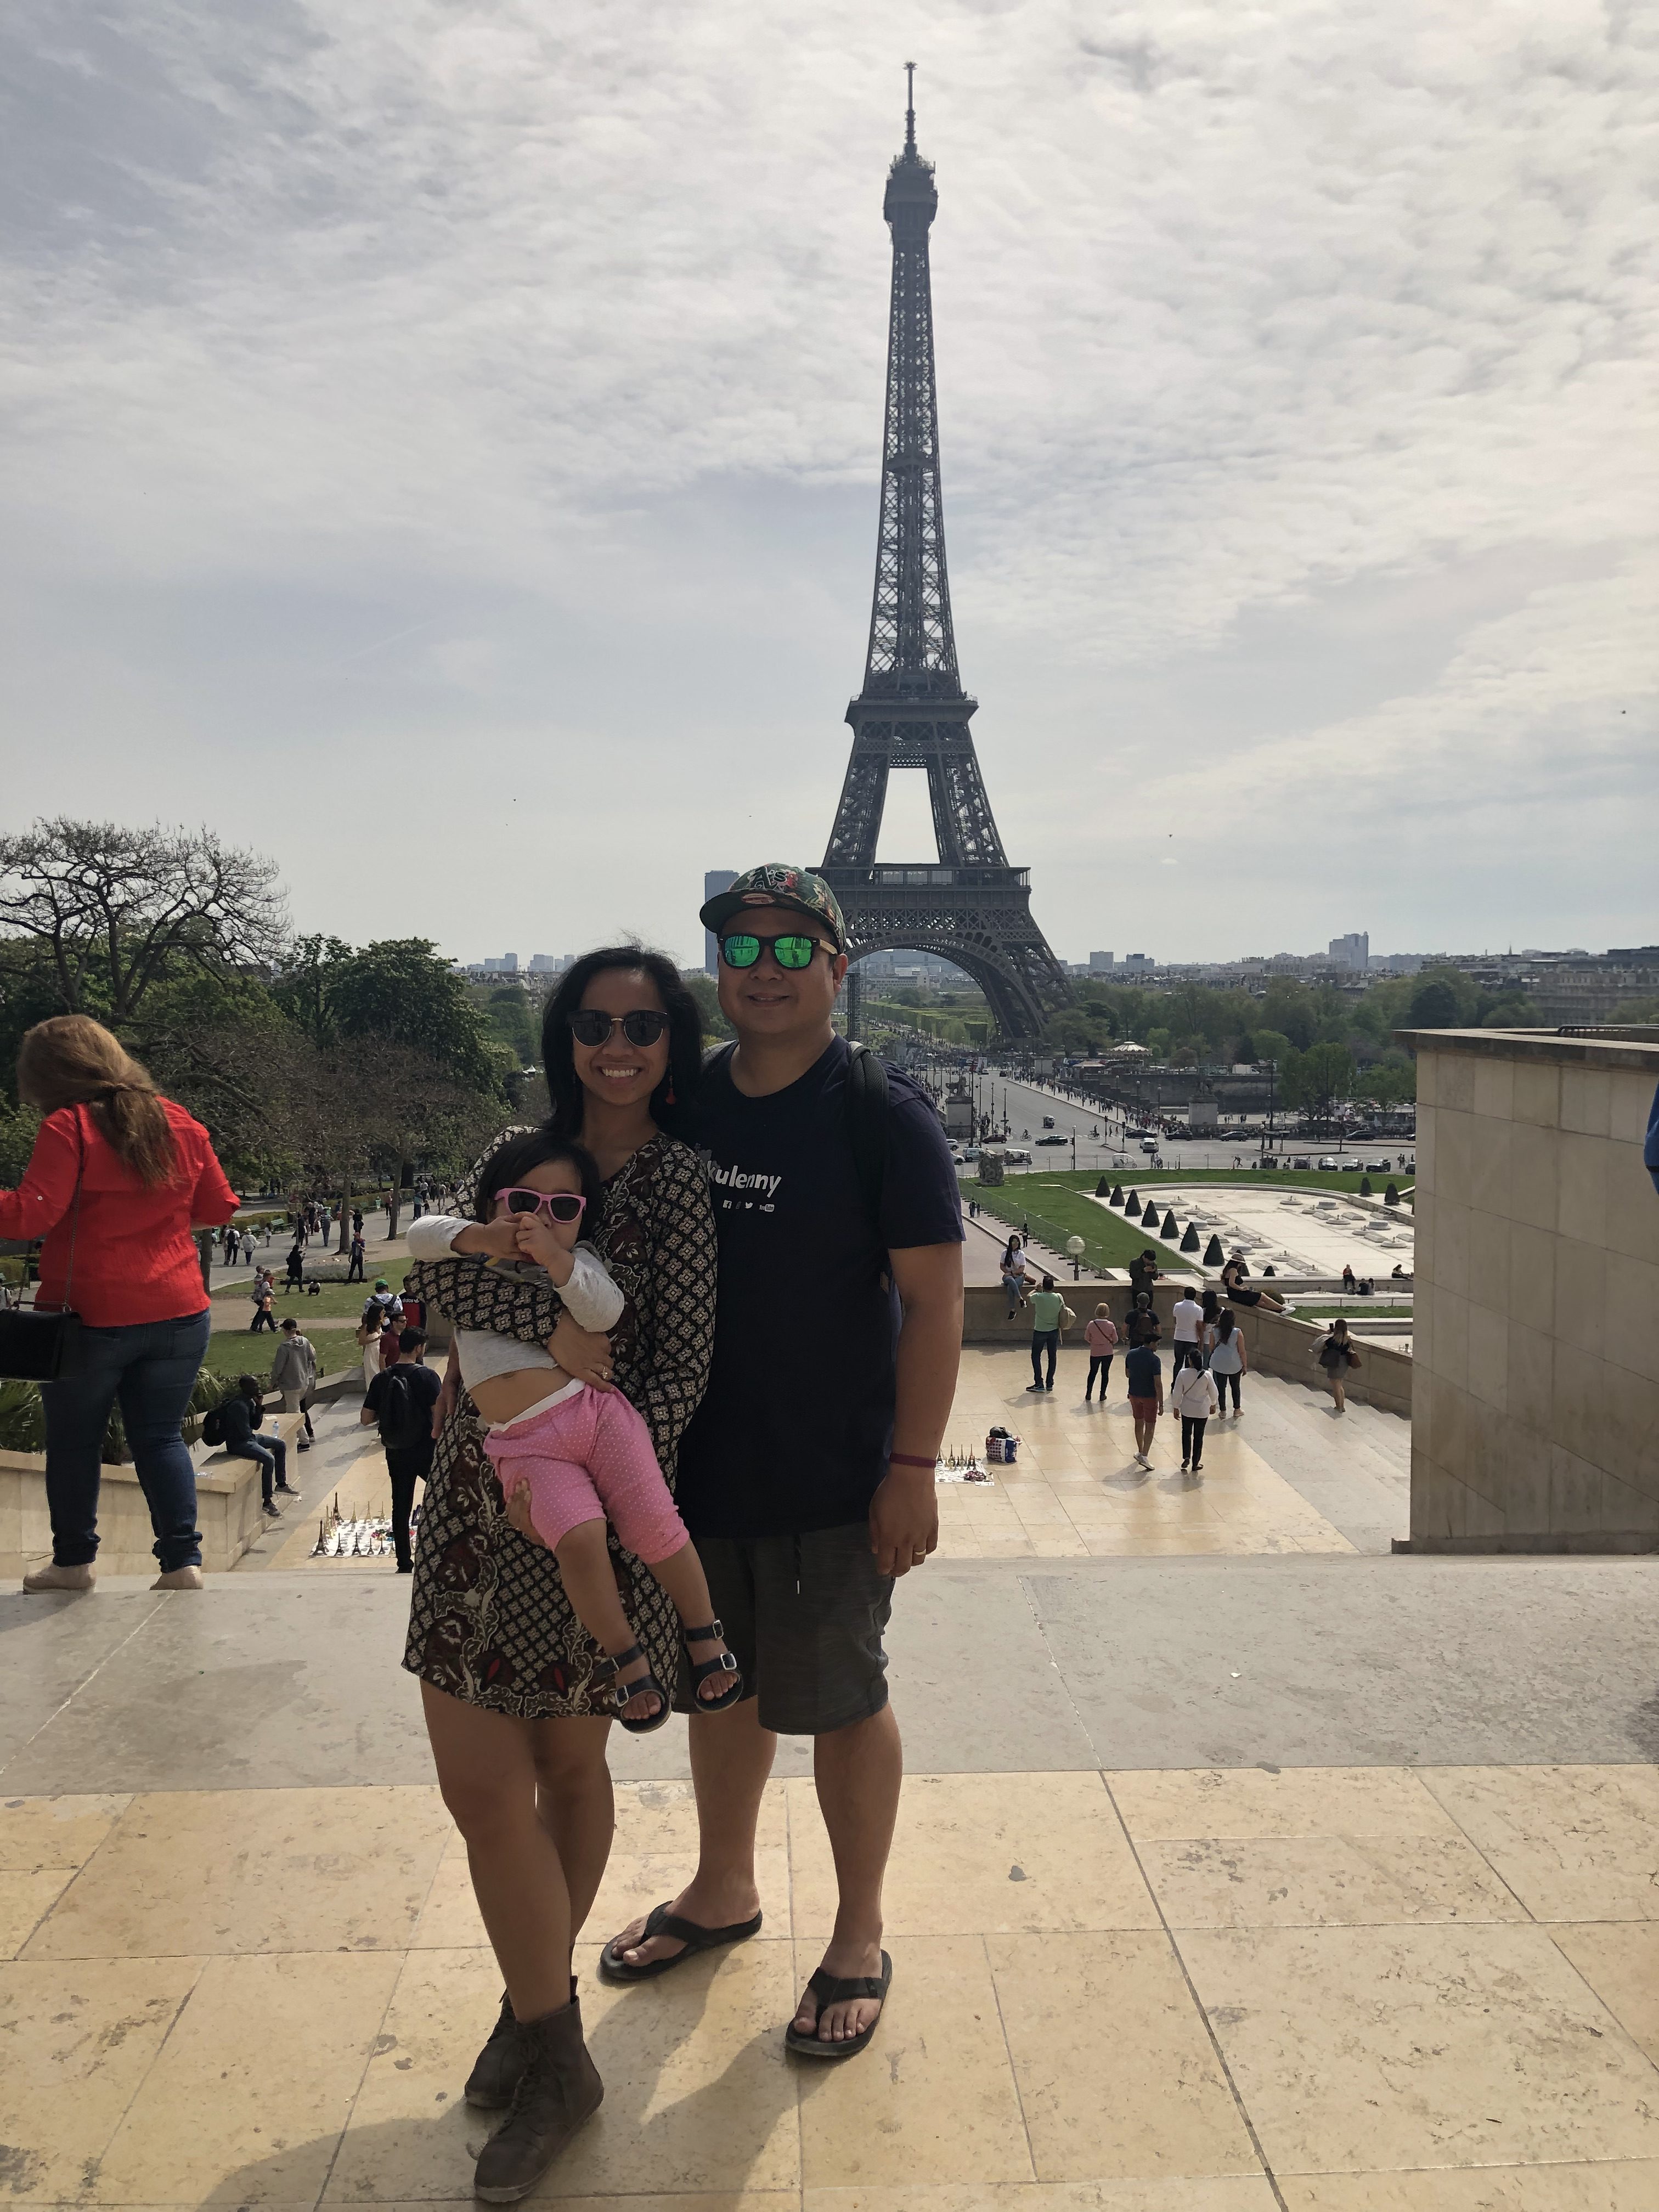 Angelica, standing next to her partner, holds her daughter. The Eiffel Tower can be seen in the background.